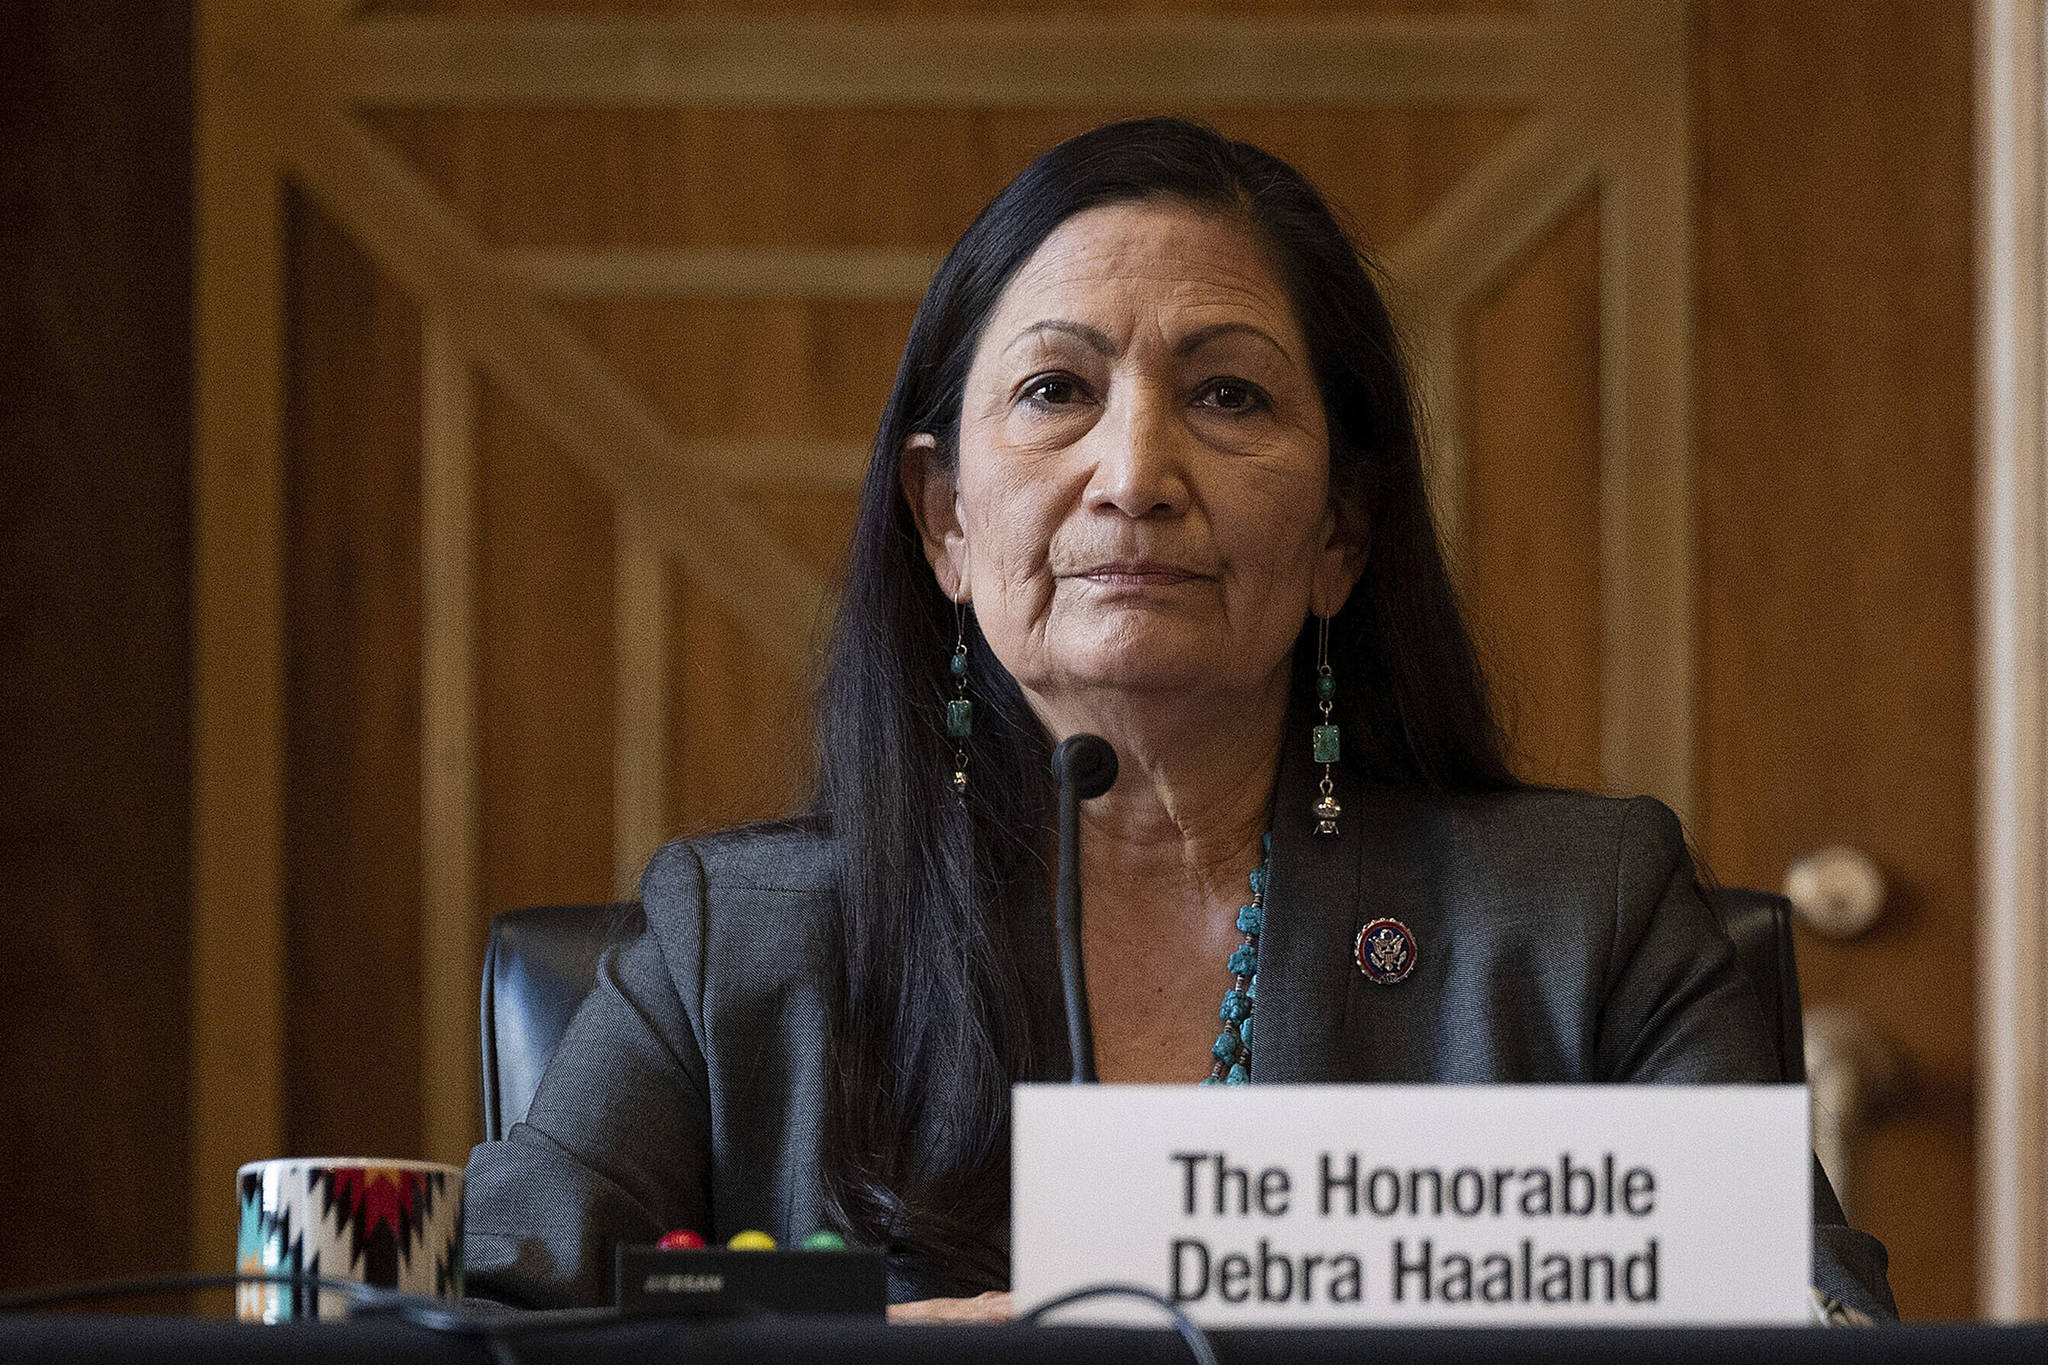 Rep. Deb Haaland, D-N.M., listens during the Senate Committee on Energy and Natural Resources hearing on her nomination to be Interior secretary, on Capitol Hill in Washington. Some Republican senators labeled Haaland “radical” over her calls to reduce dependence on fossil fuels and address climate change, and said that could hurt rural America and major oil and gas-producing states. The label of Haaland as a “radical” by Republican lawmakers is getting pushback from Native Americans. (Jim Watson / Pool Photo)